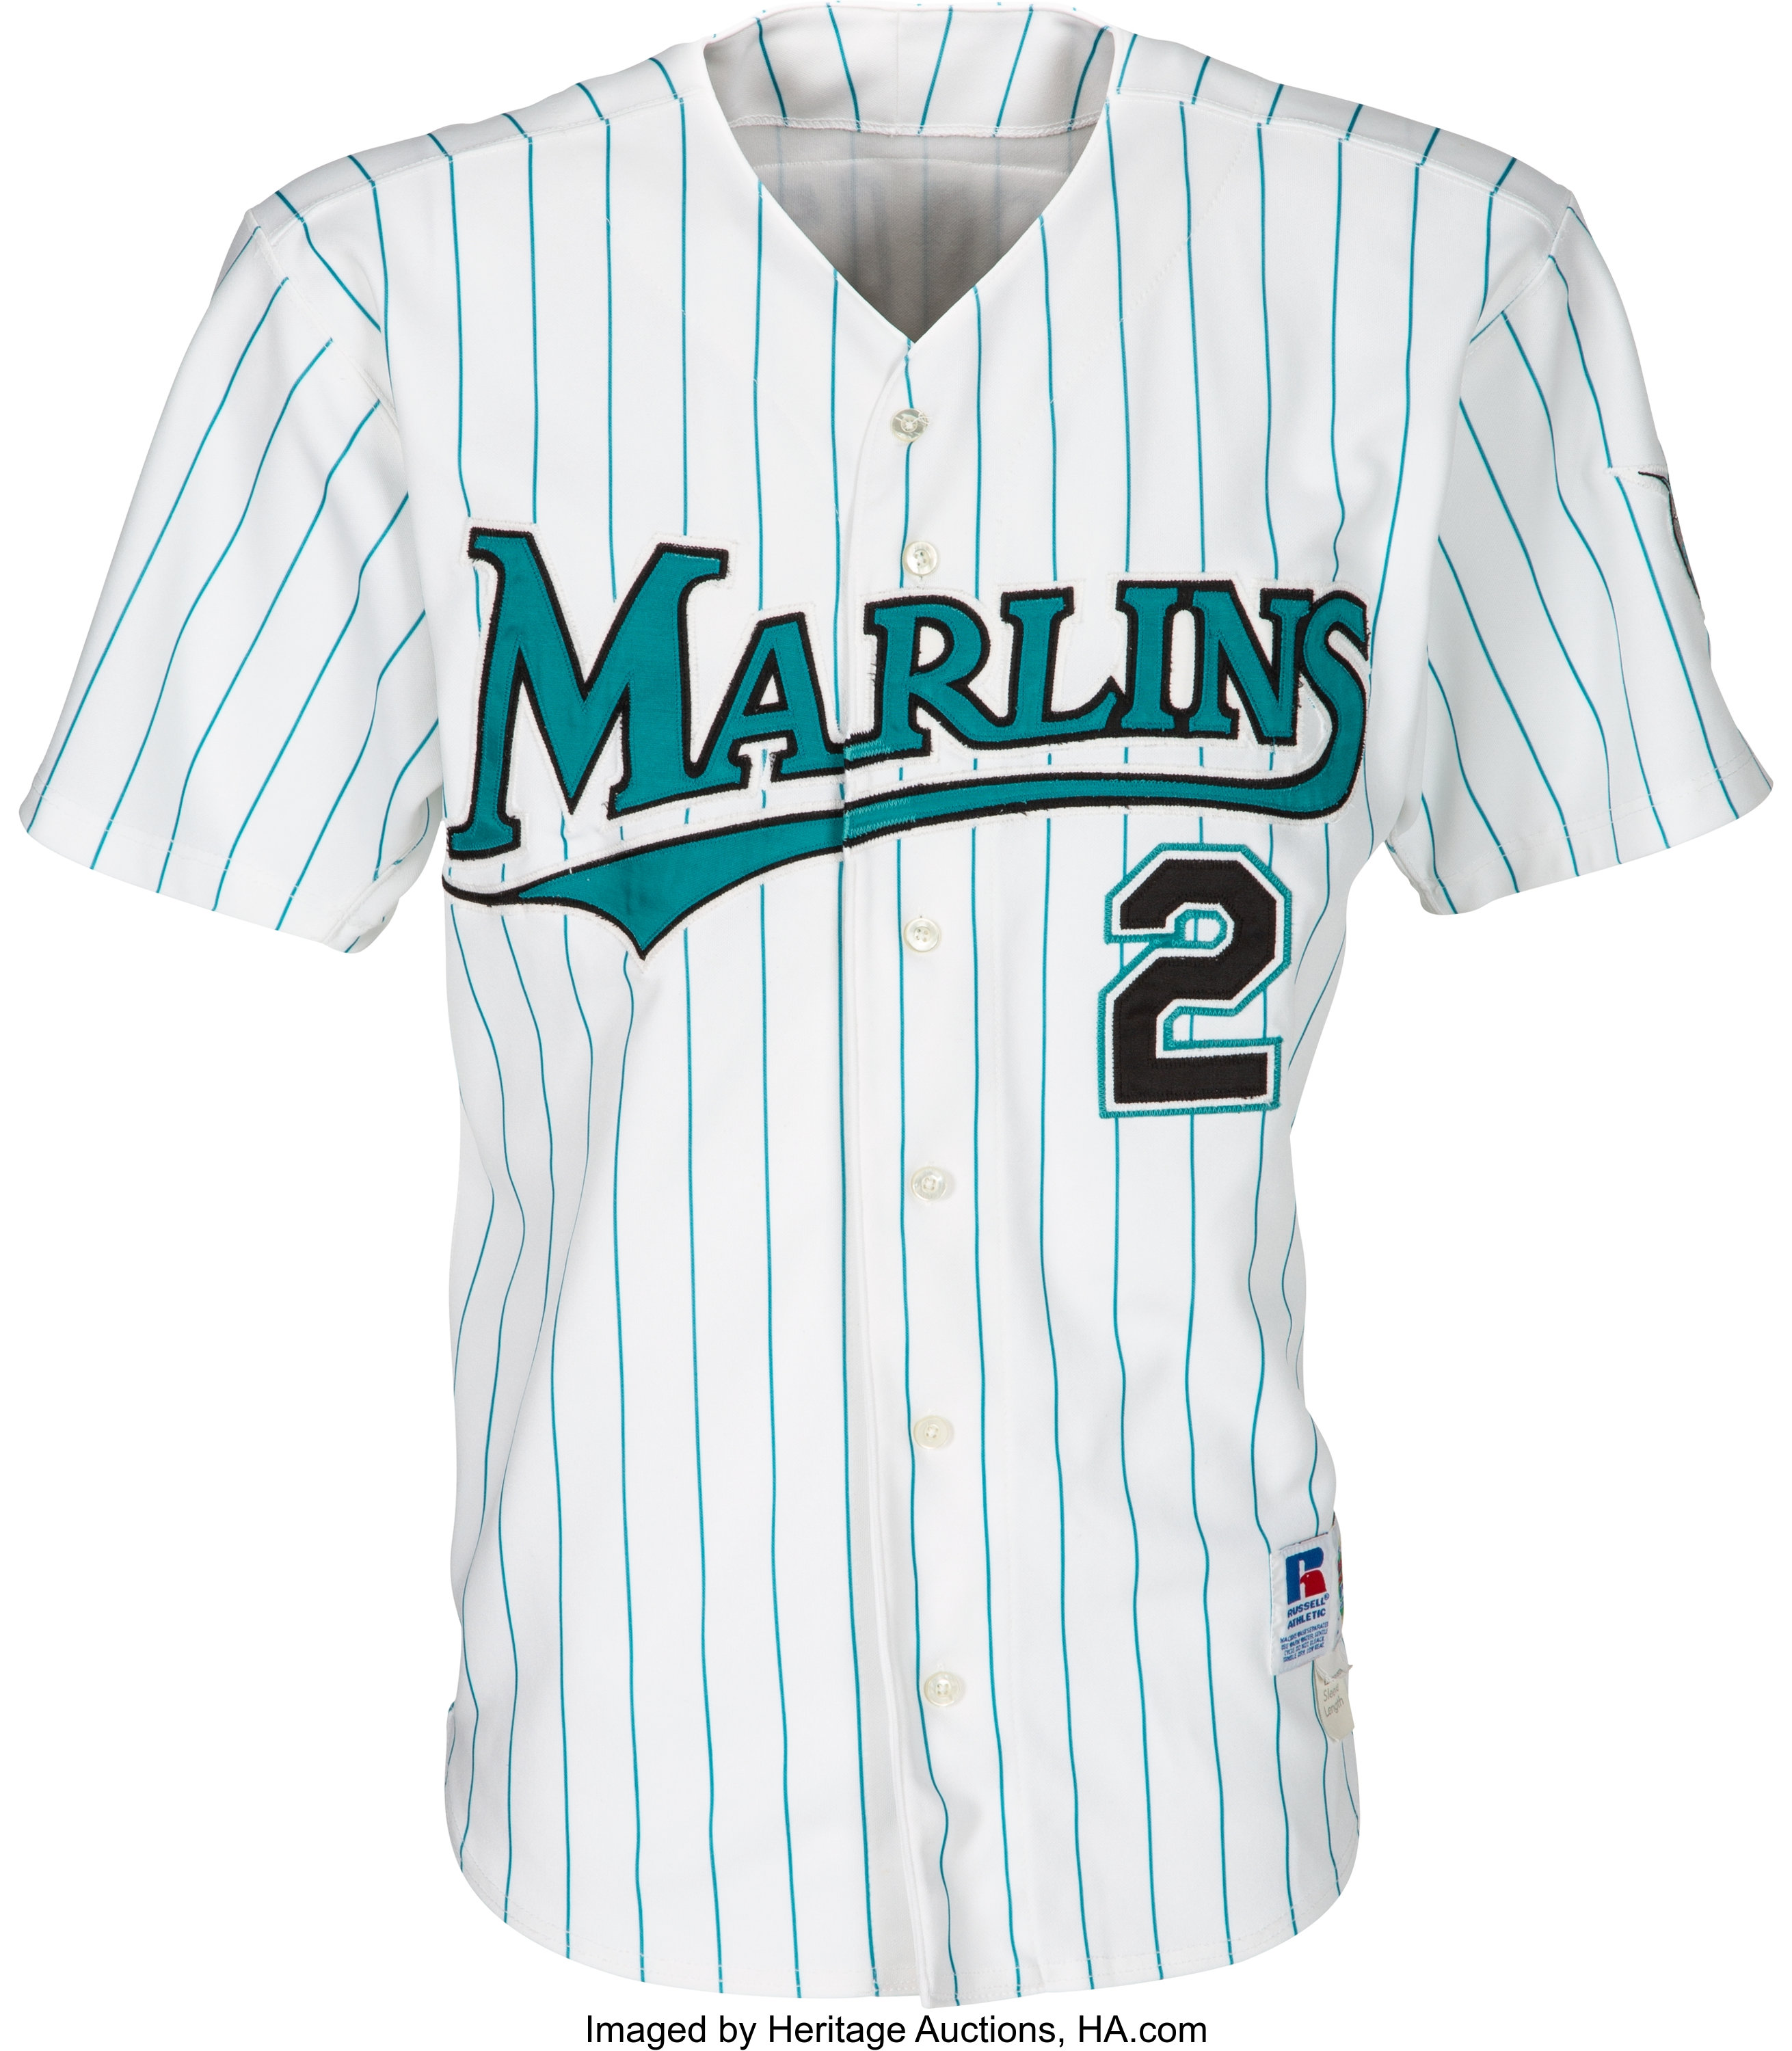 Florida Marlins Majestic 1996 Turn Back the Clock Authentic Team Jersey -  White/Teal